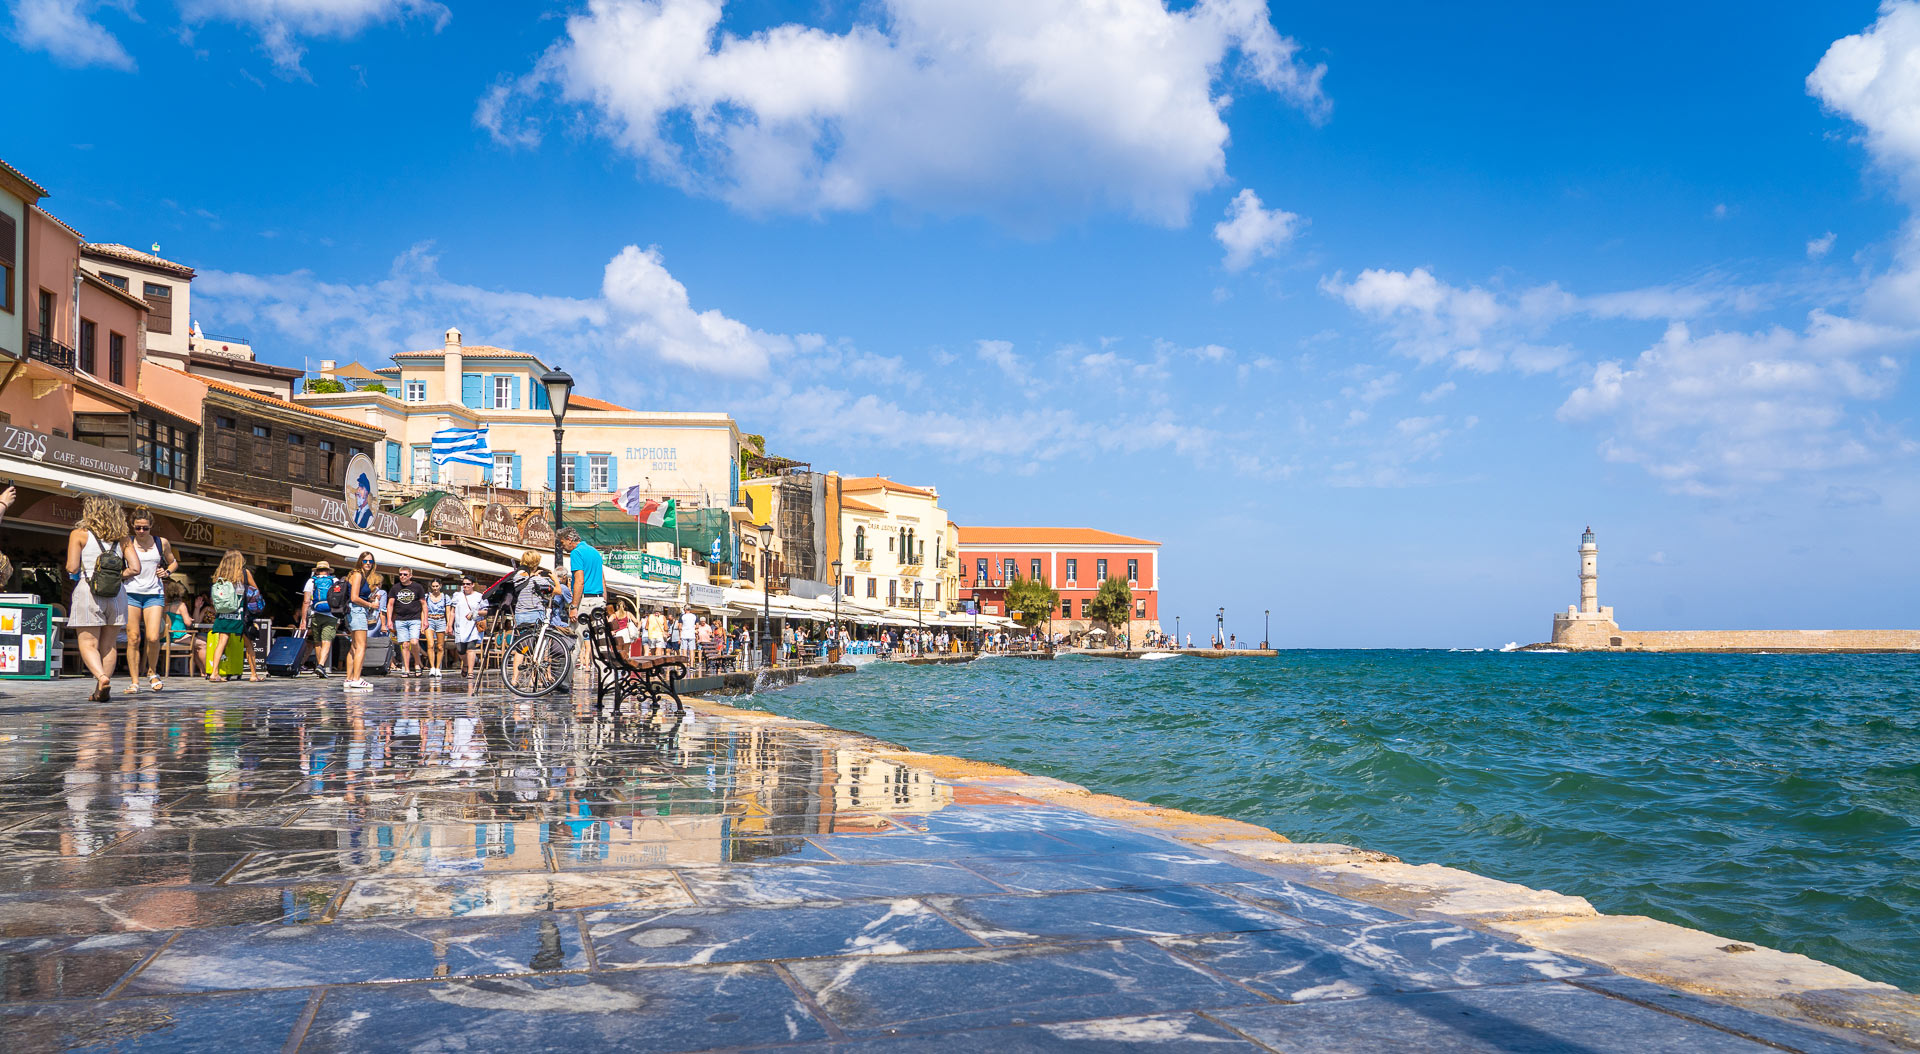 The old Venetian port of Chania – 1 week in Crete itinerary